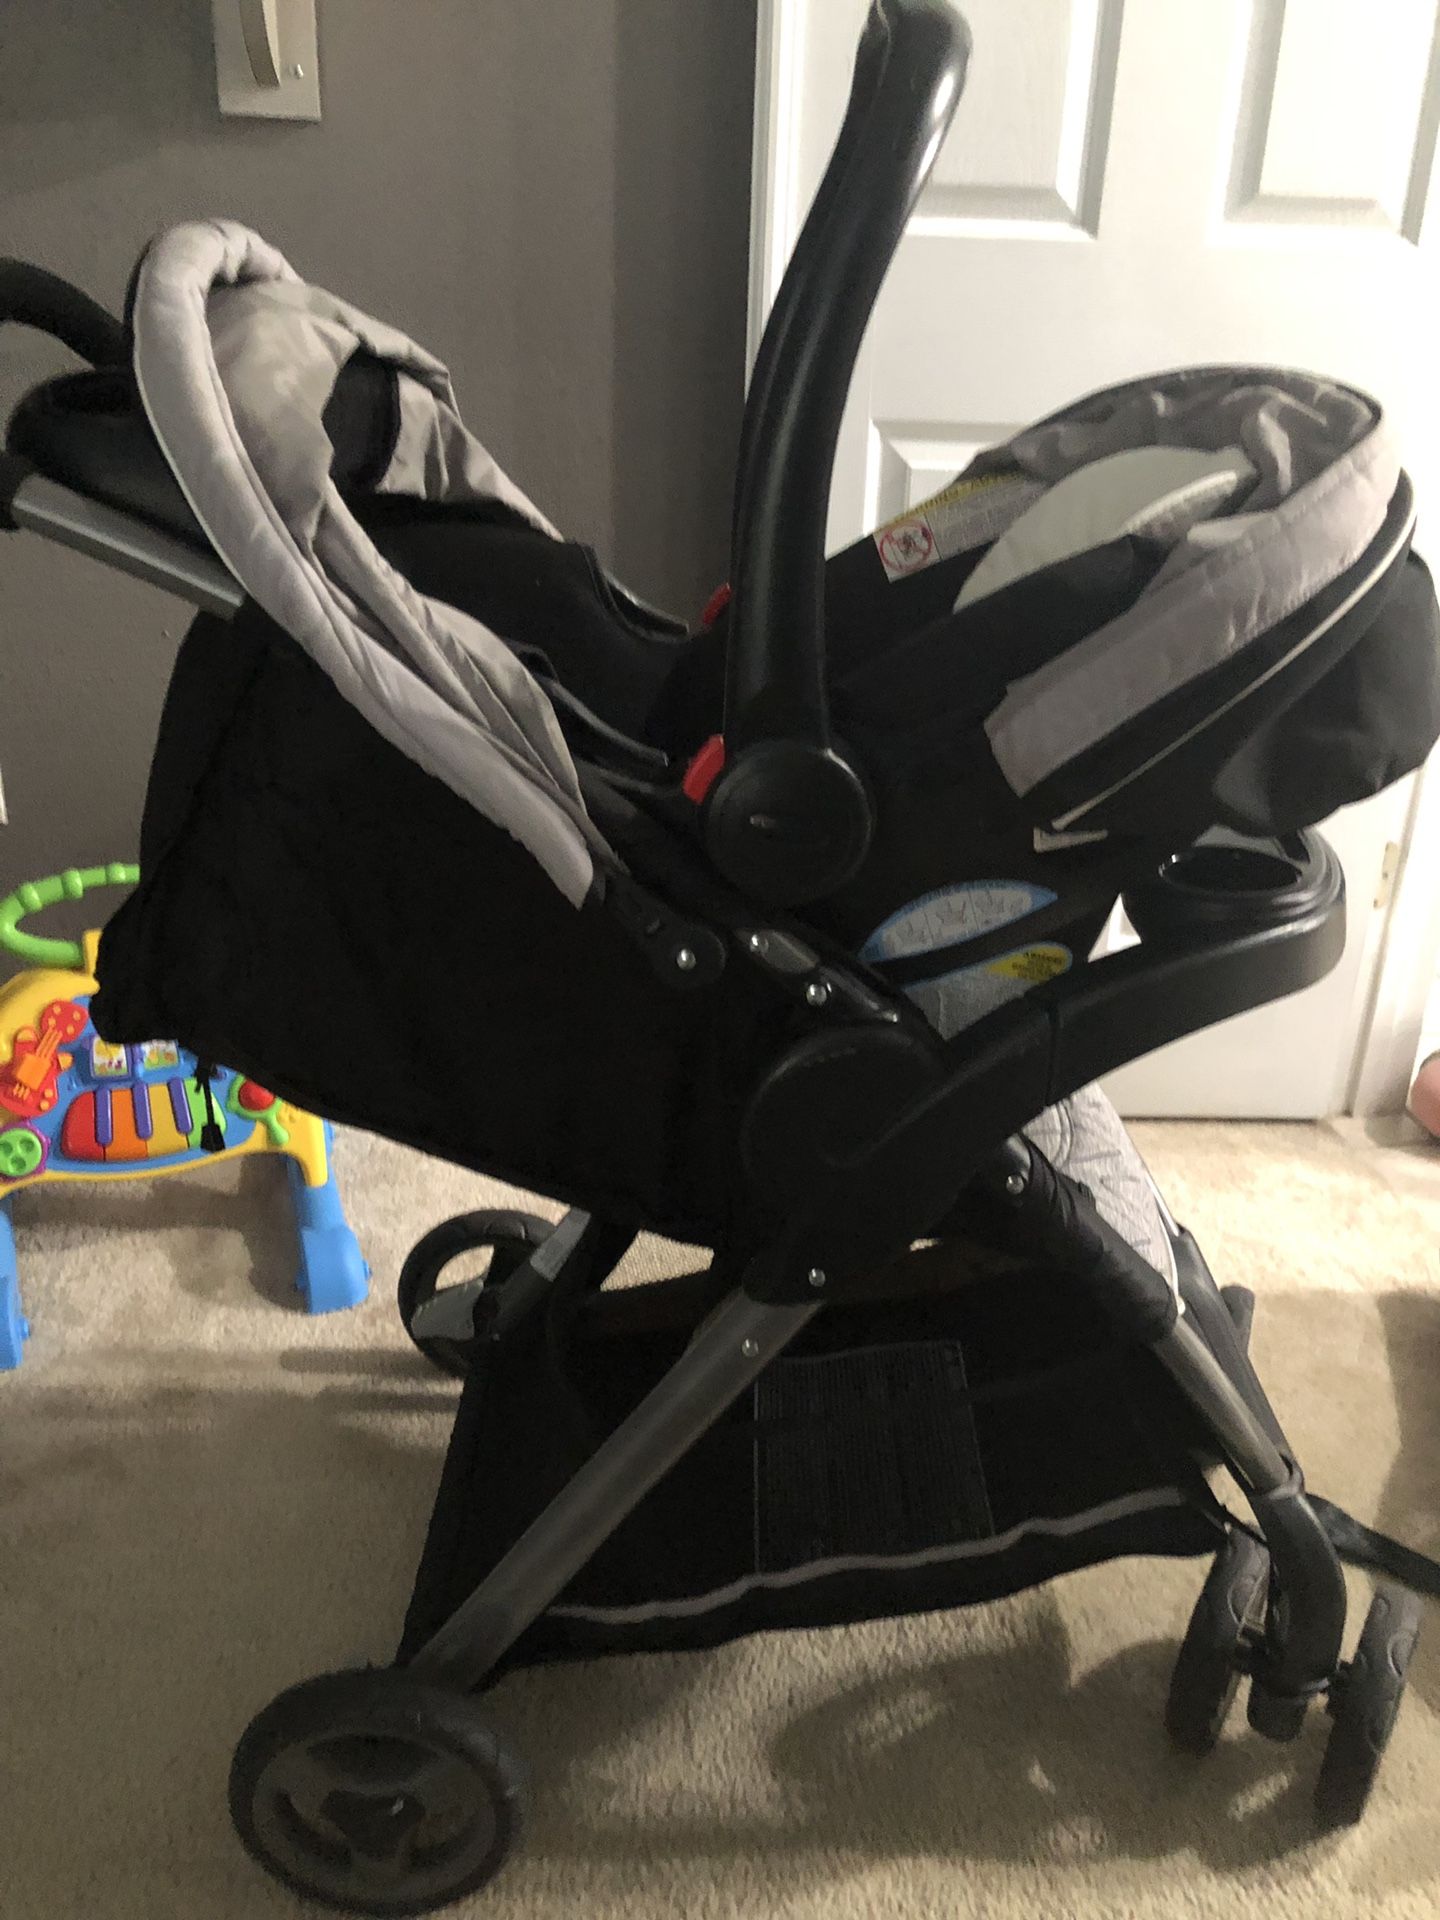 Graco click connect infant car seat and stroller combo